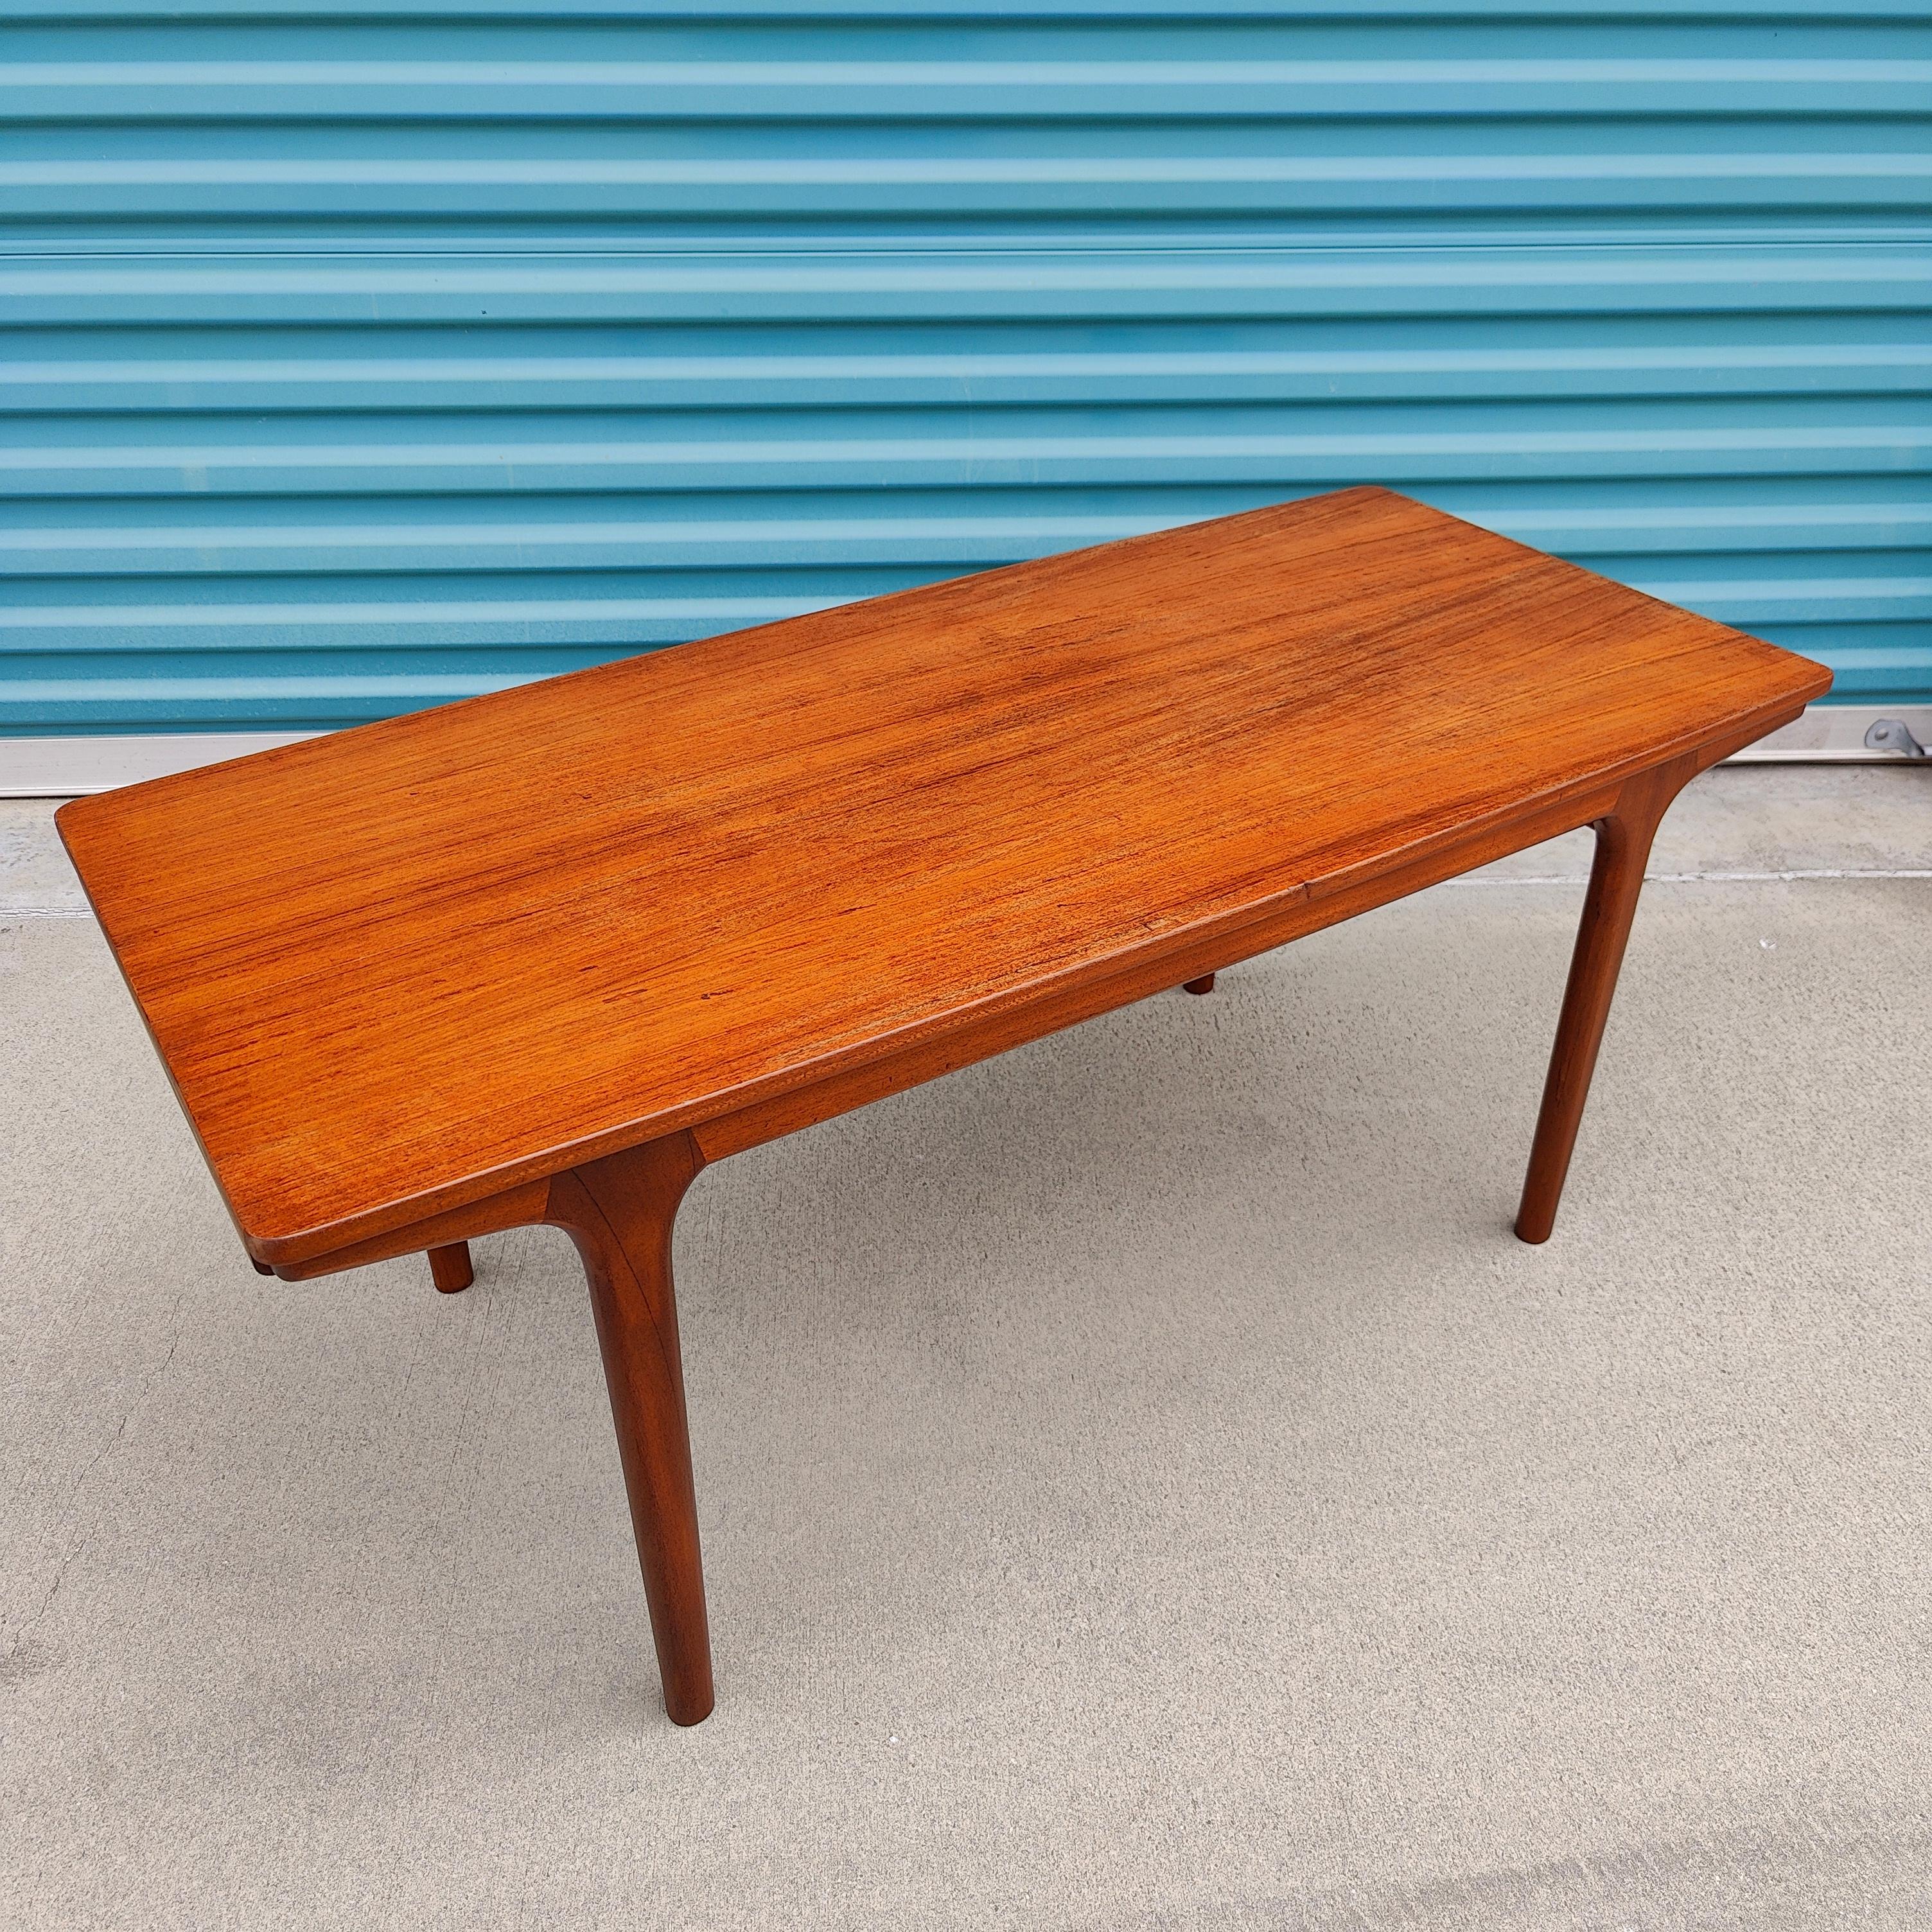 Just in, a lovely coffee table by McIntosh. Features a warm teak grain finish with extendable sides. Measures approximately 42w x 19d x 18h. Each extension adds an additional 8.25 inches. Would fit right at home in any mid century decor. if you have